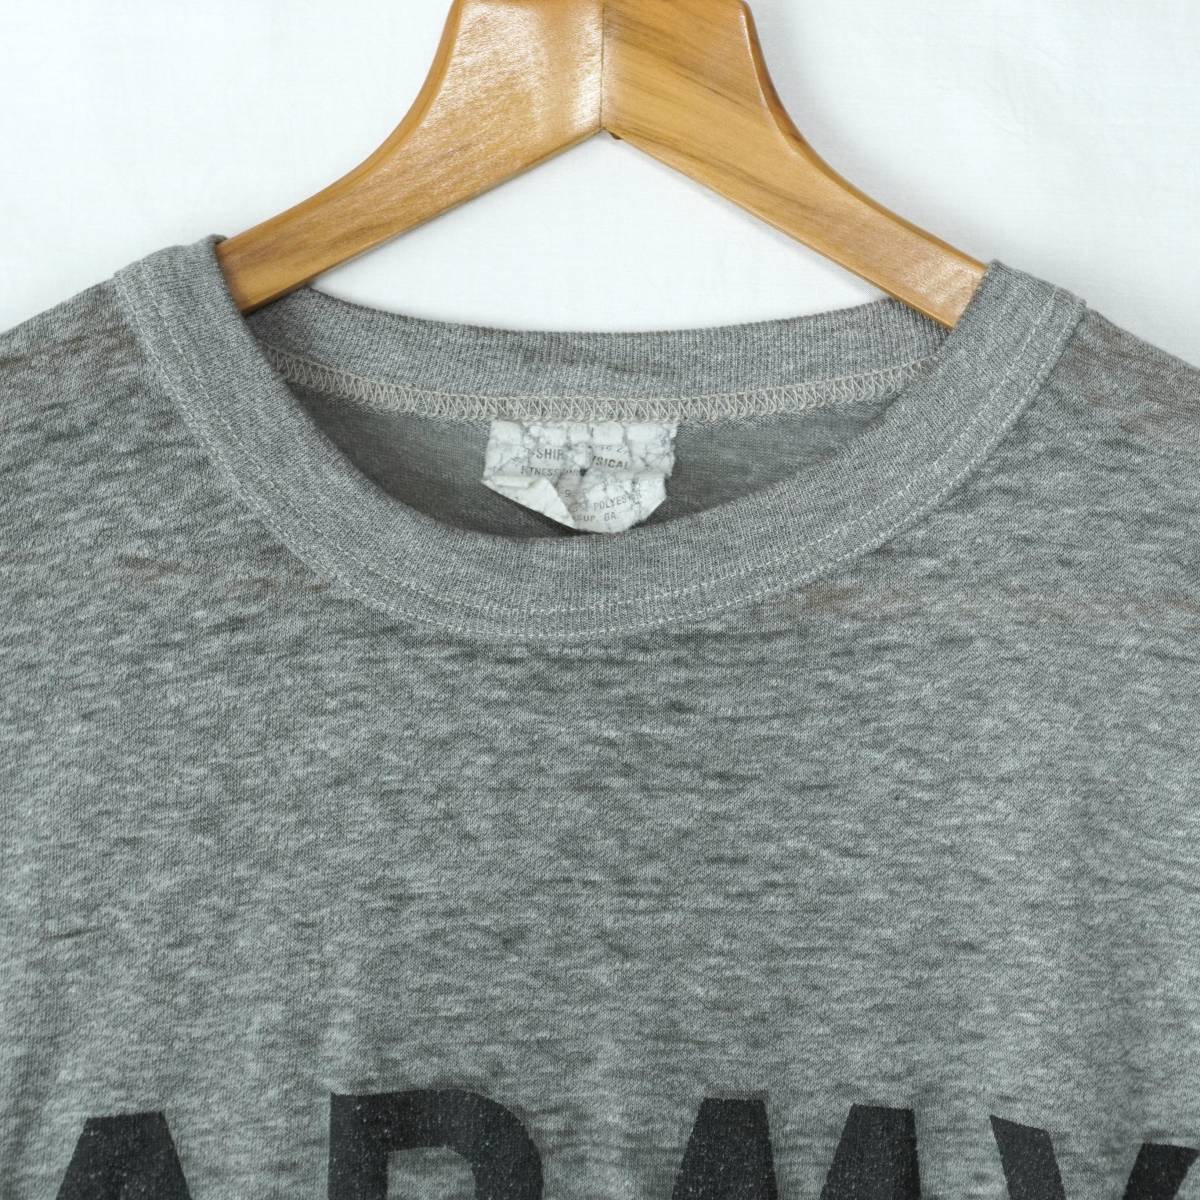 US ARMY T-Shirts 1990s MEDIUM T182 Made in USA America army T-shirt military T-shirt 1990 period America made 